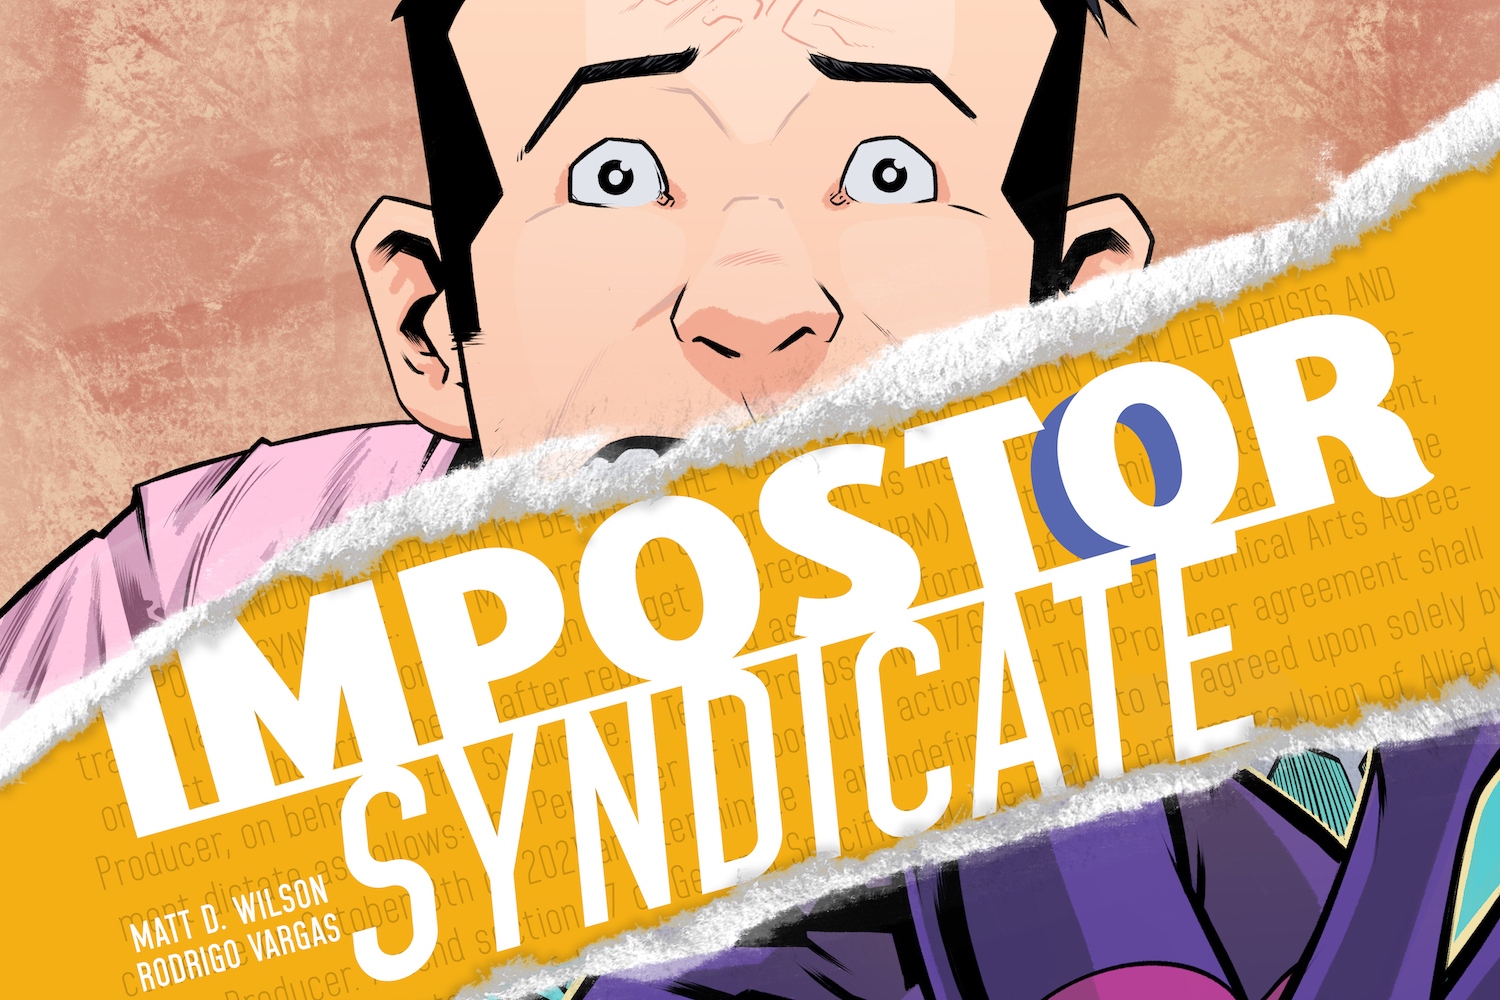 Matt D. Wilson introduces the world to the 'Impostor Syndicate'